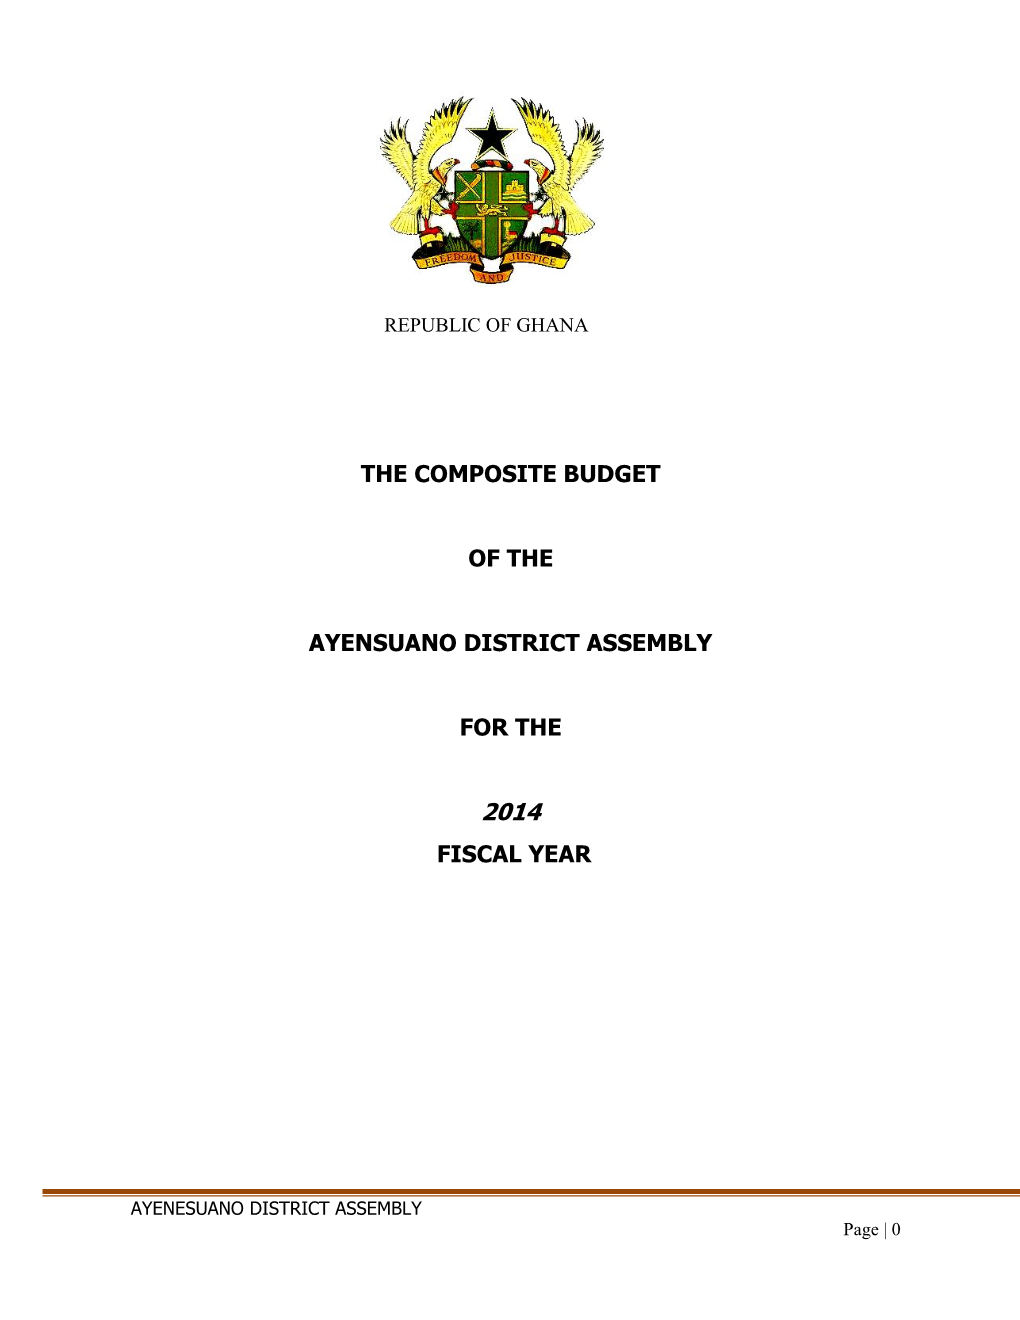 The Composite Budget of the Ayensuano District